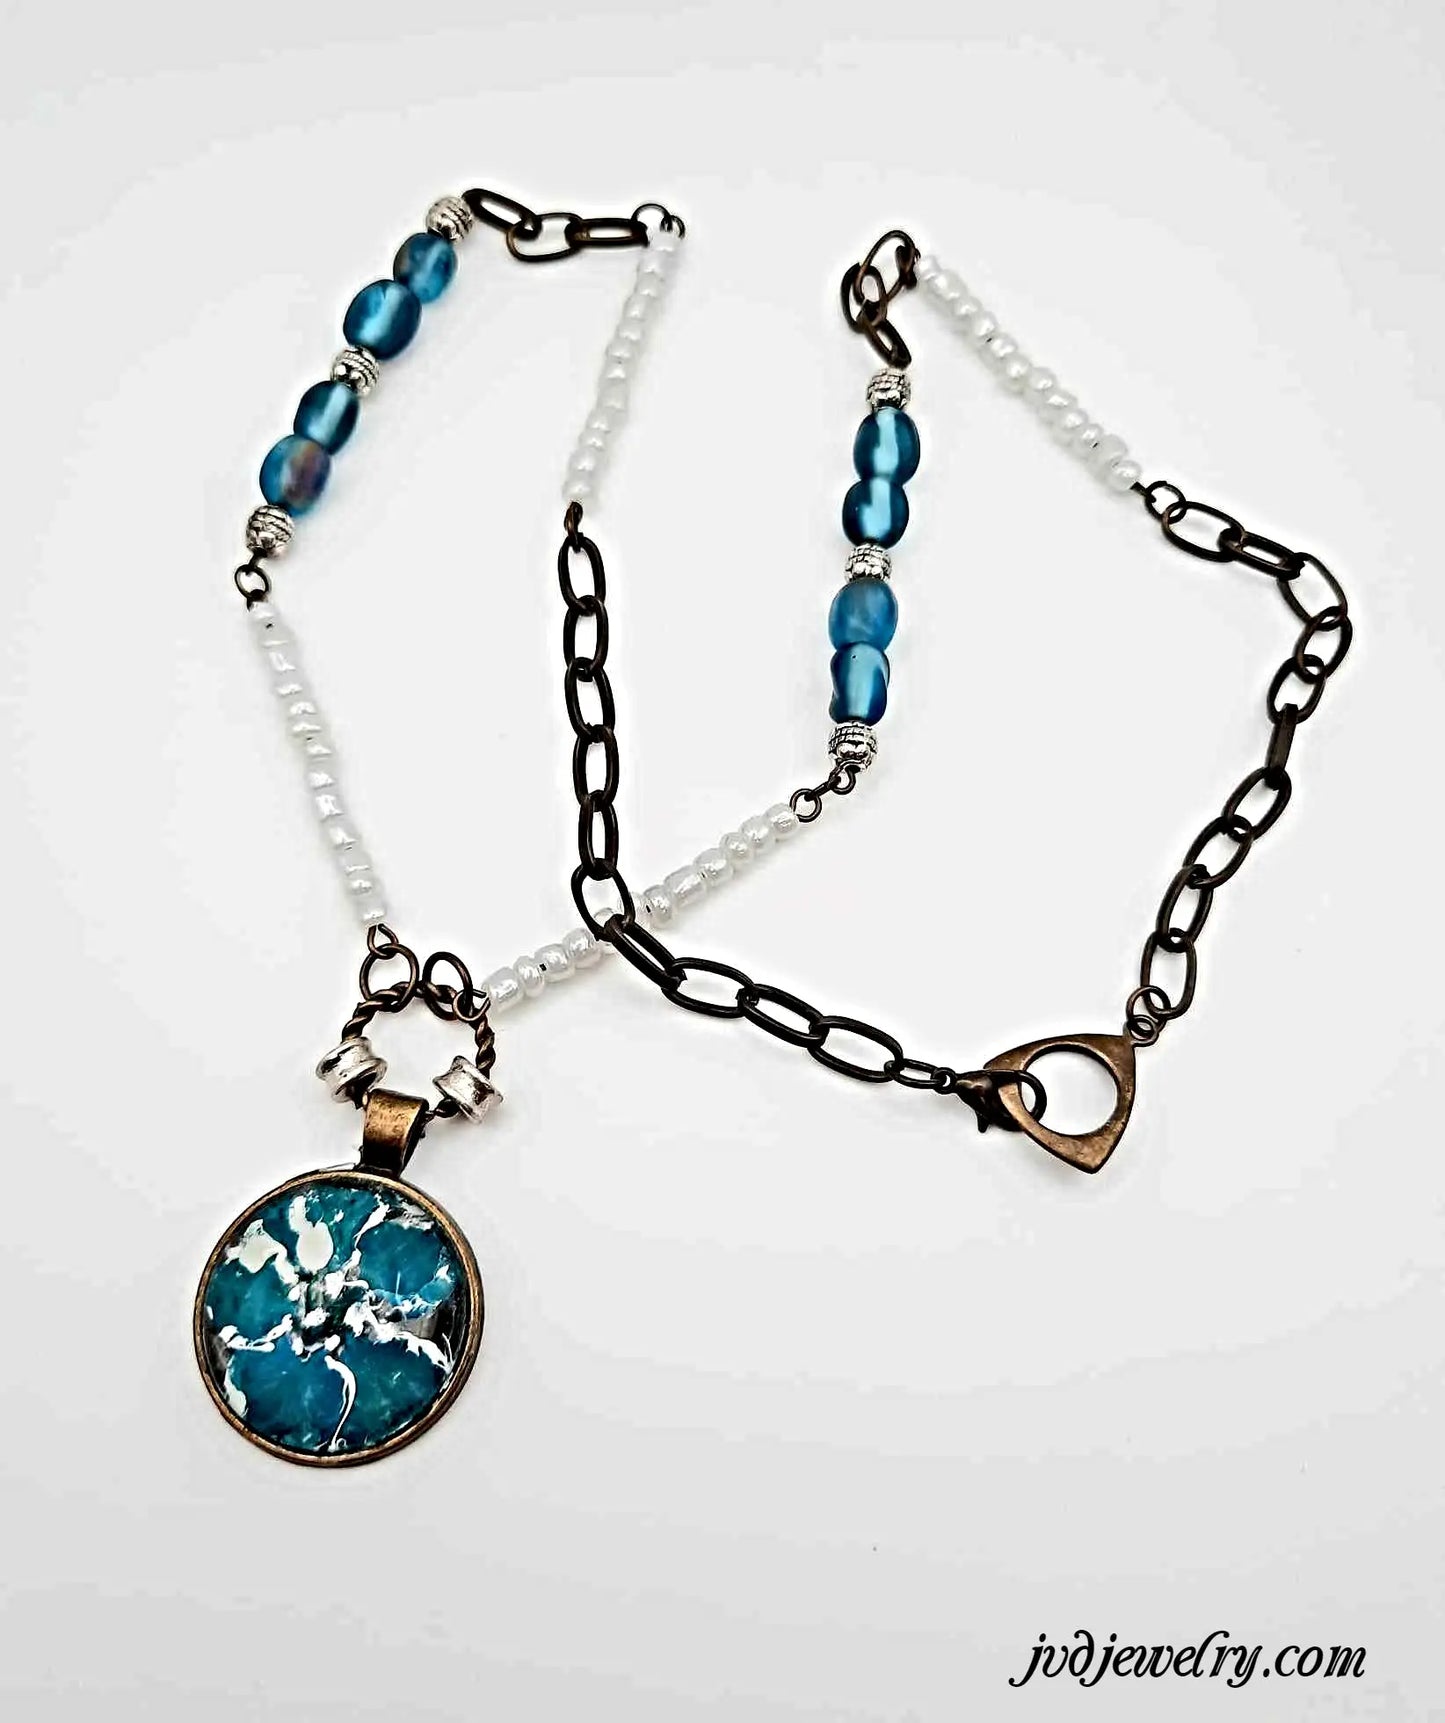 Turquoise beaded resin pendant necklace - Image #1